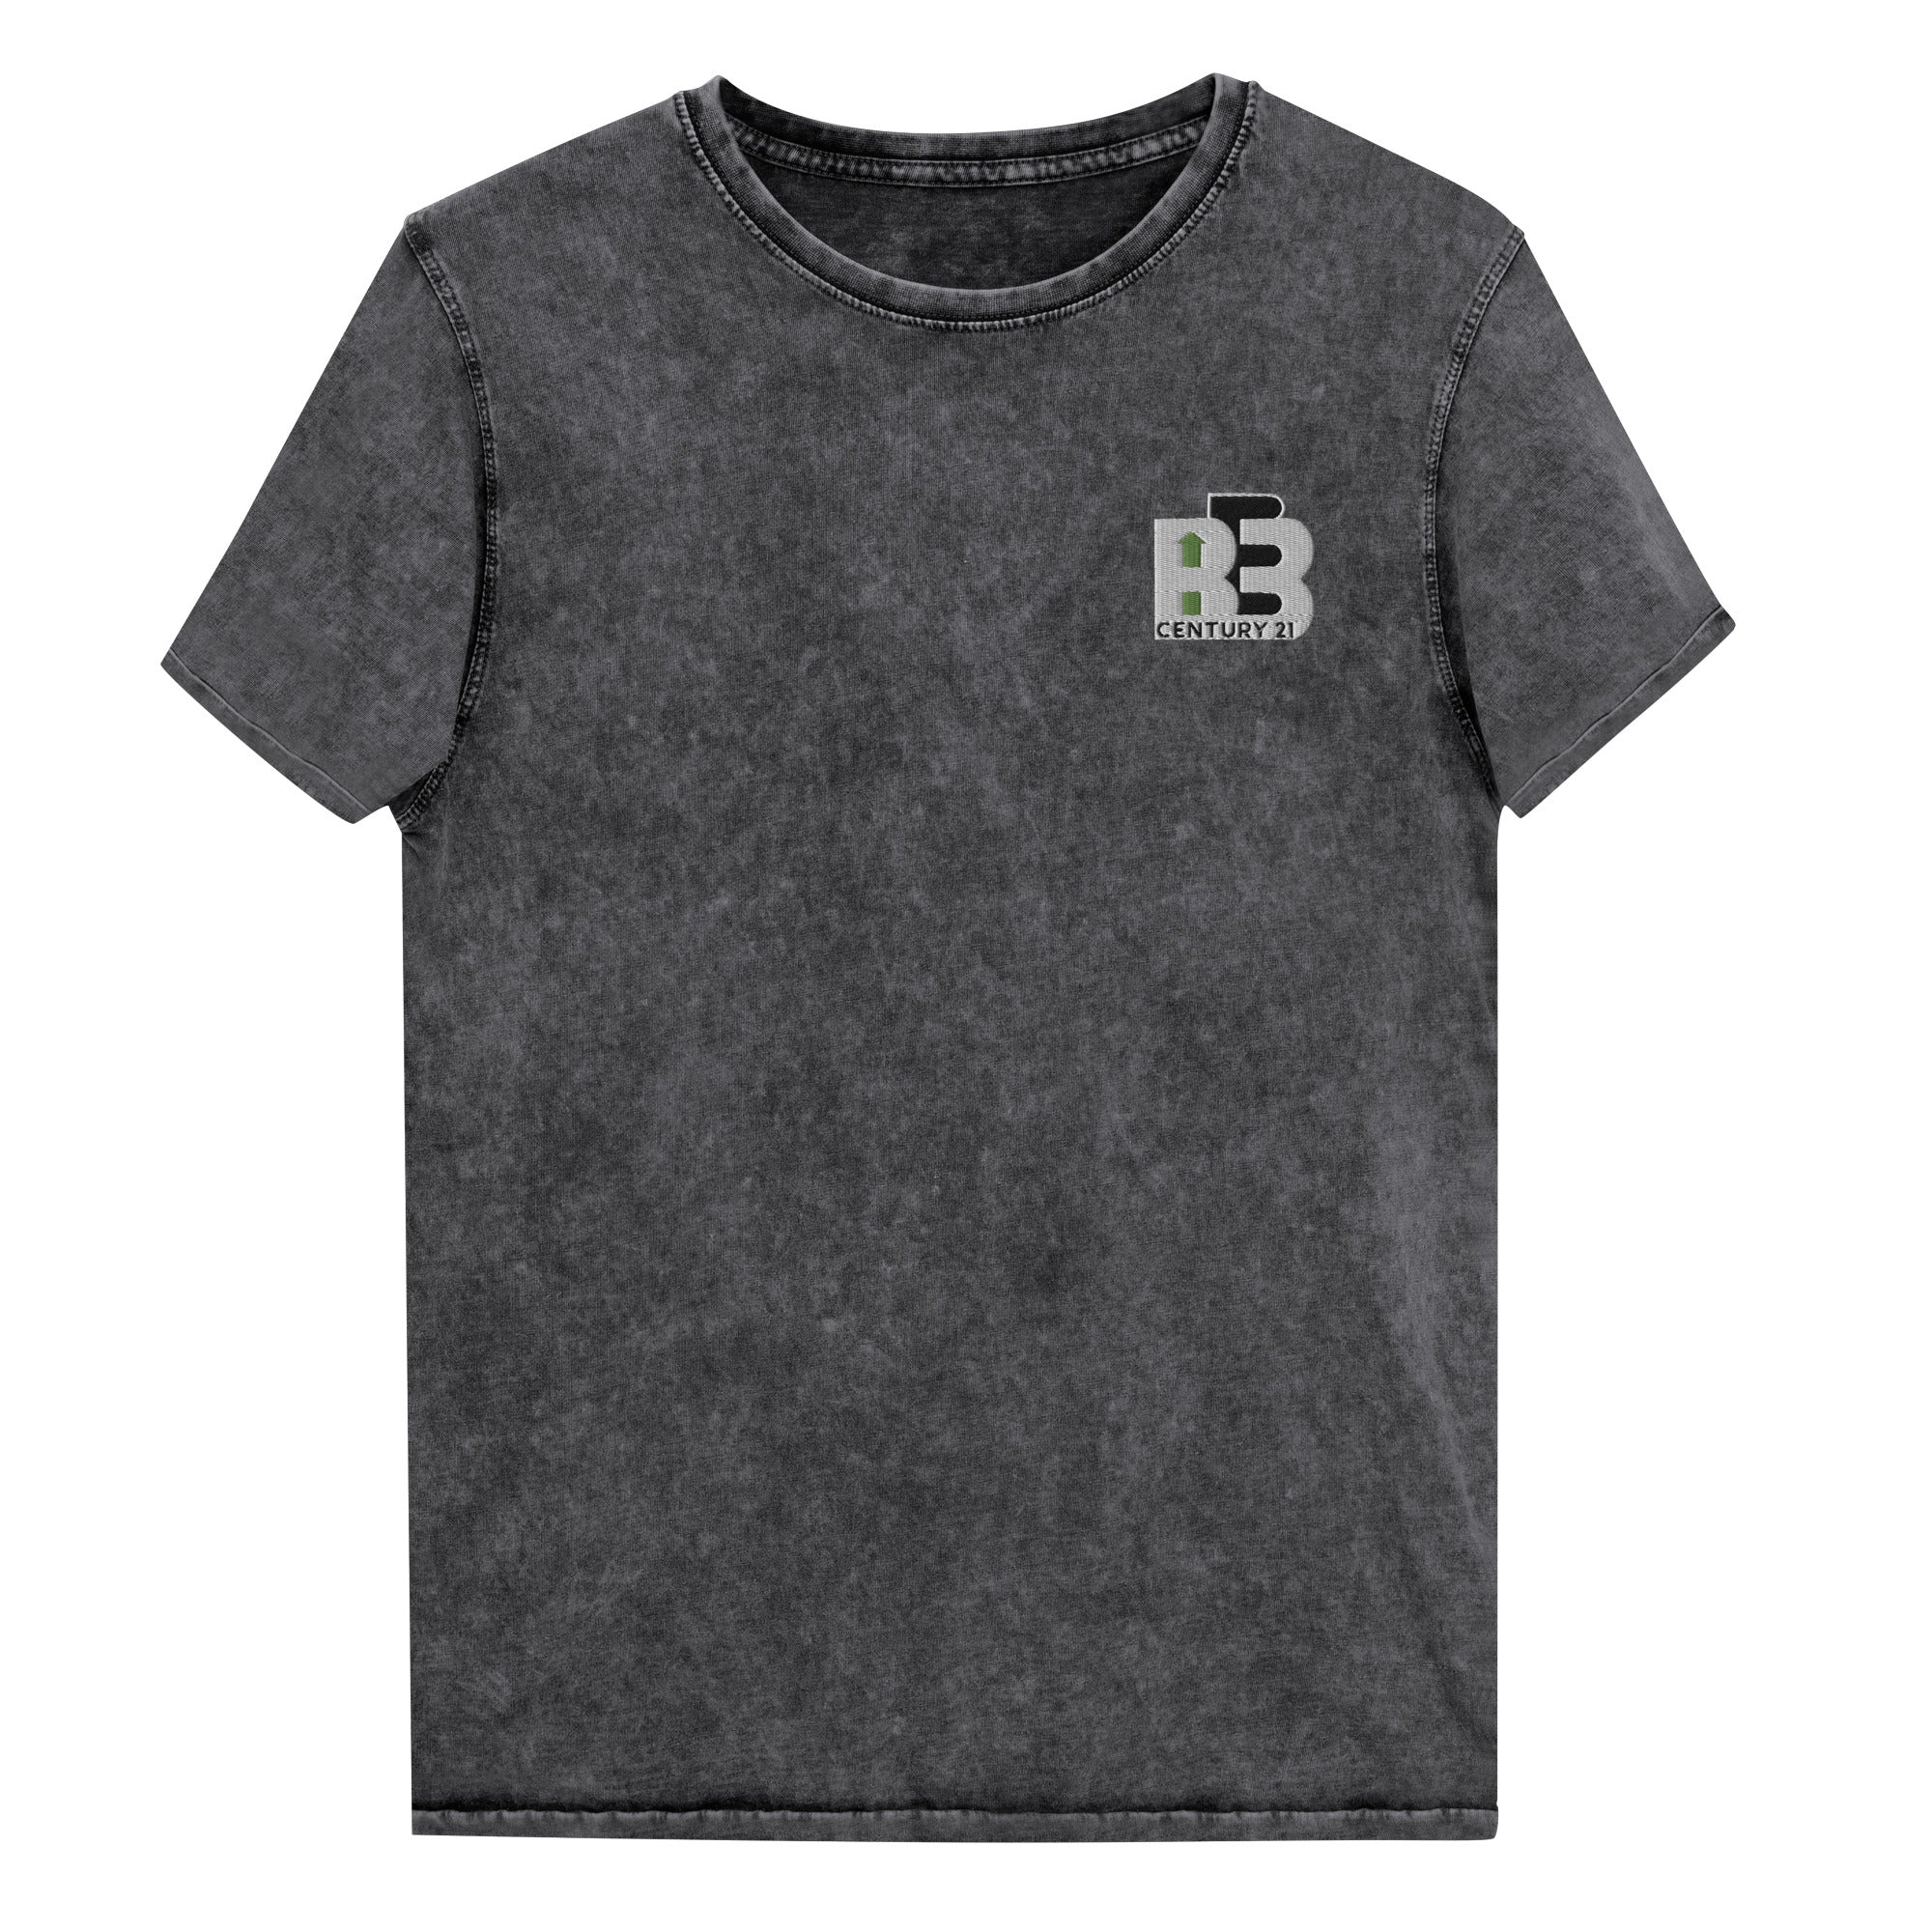 BE3 Embroidered Seal Men's Denim T-Shirt